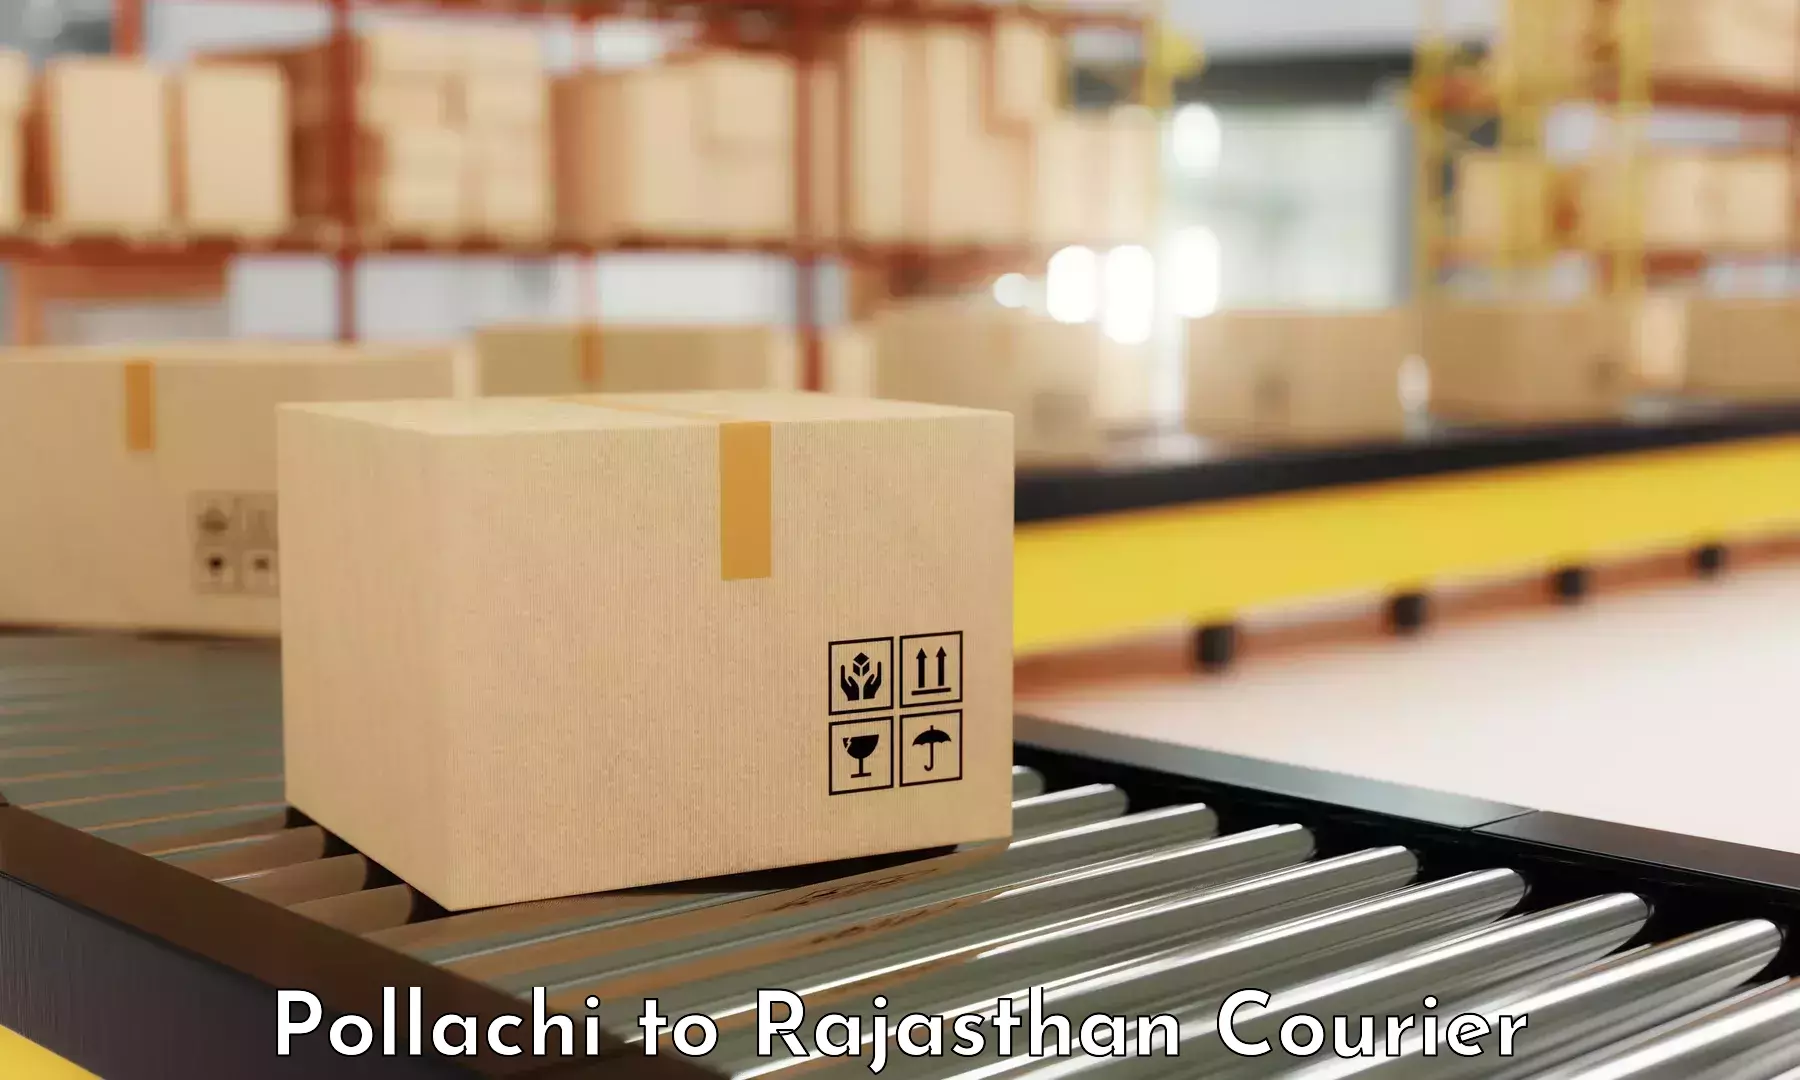 Reliable delivery network Pollachi to Weir